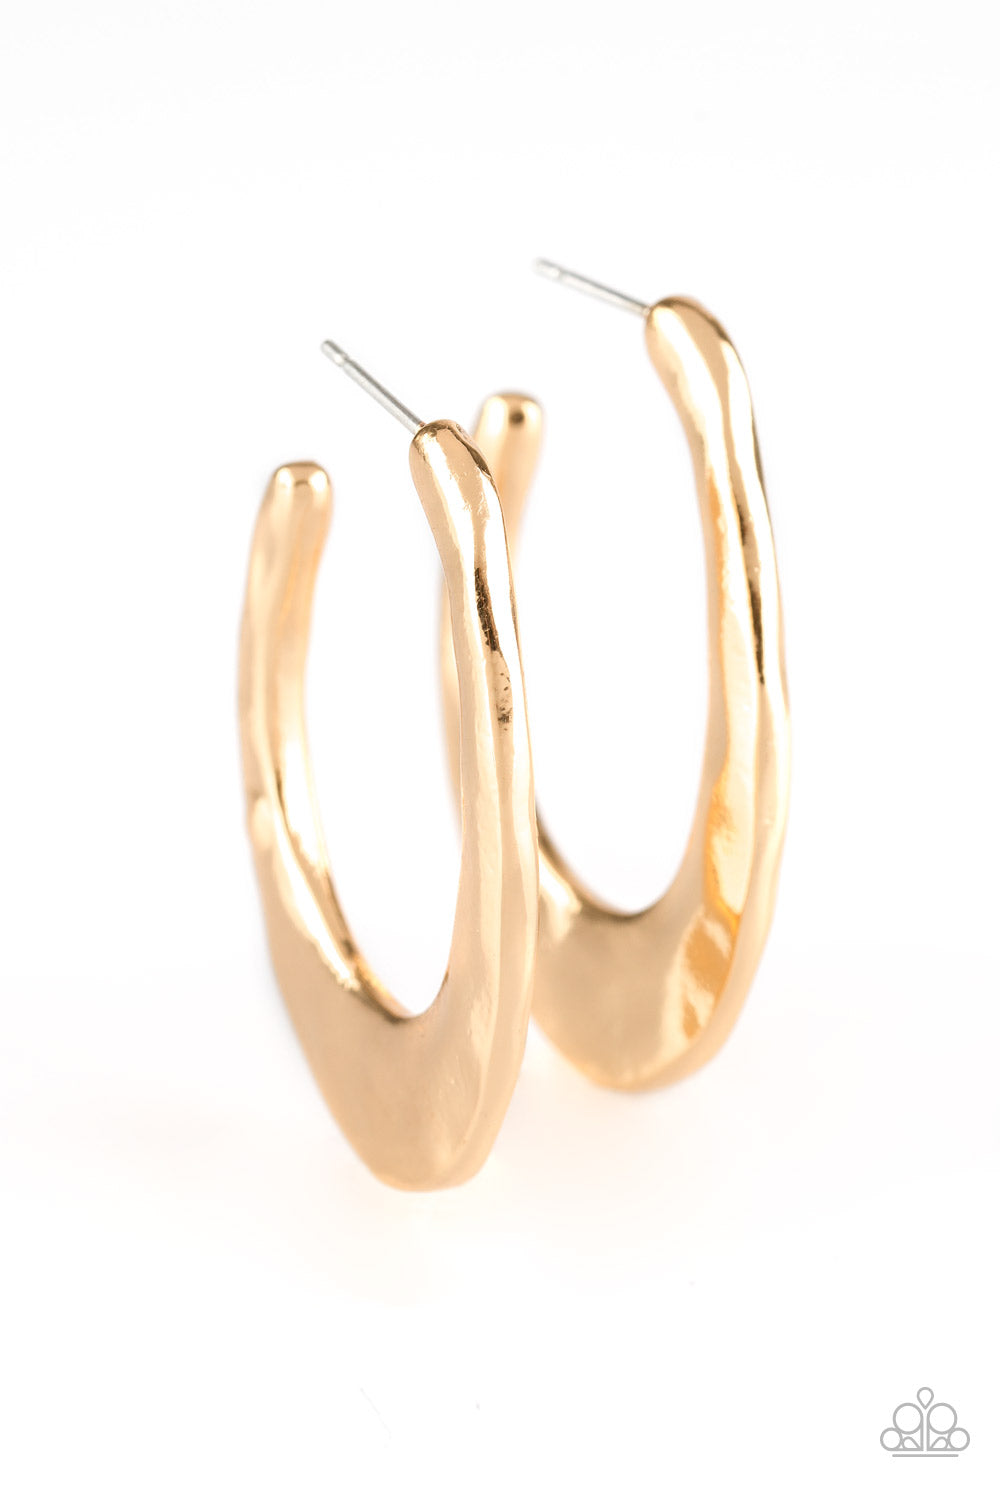 Paparazzi HOOP Me Up - Gold Hoop Earrings - A Finishing Touch 